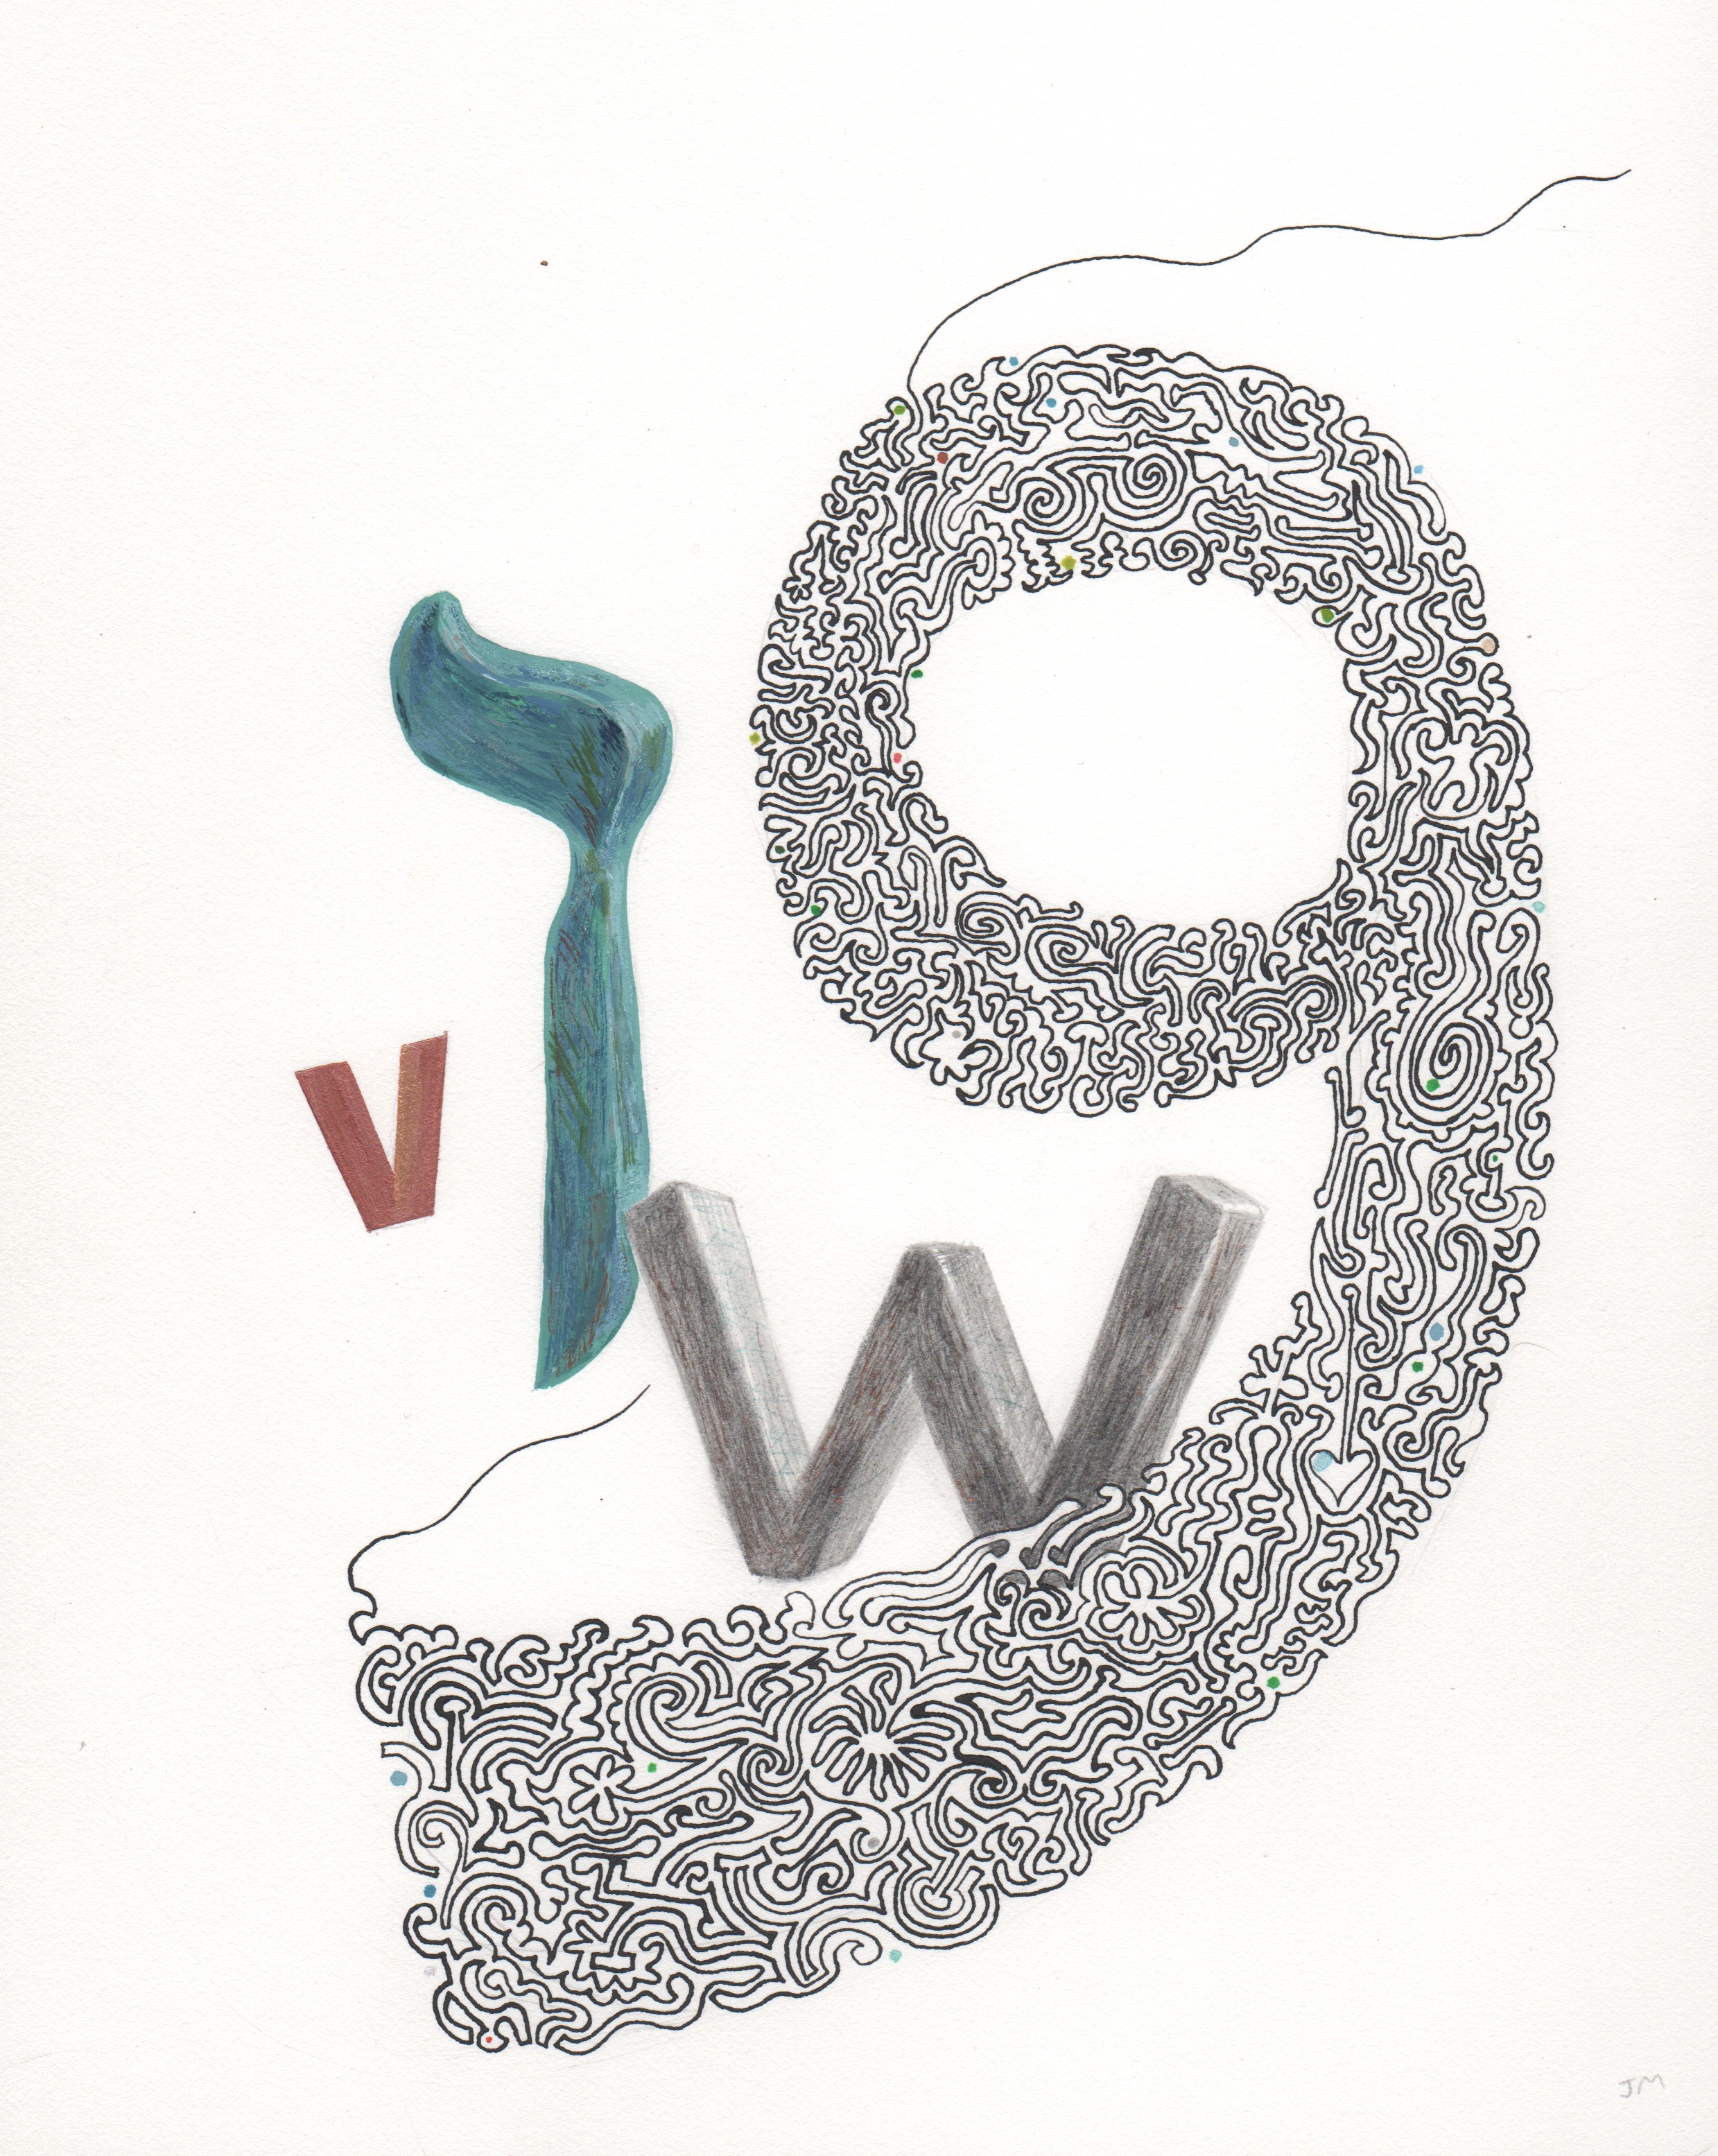  Joel Moskowitz,  Arabic  Waaw  and Hebrew  Vav , with V and W,  Mixed media on paper, 11x9 